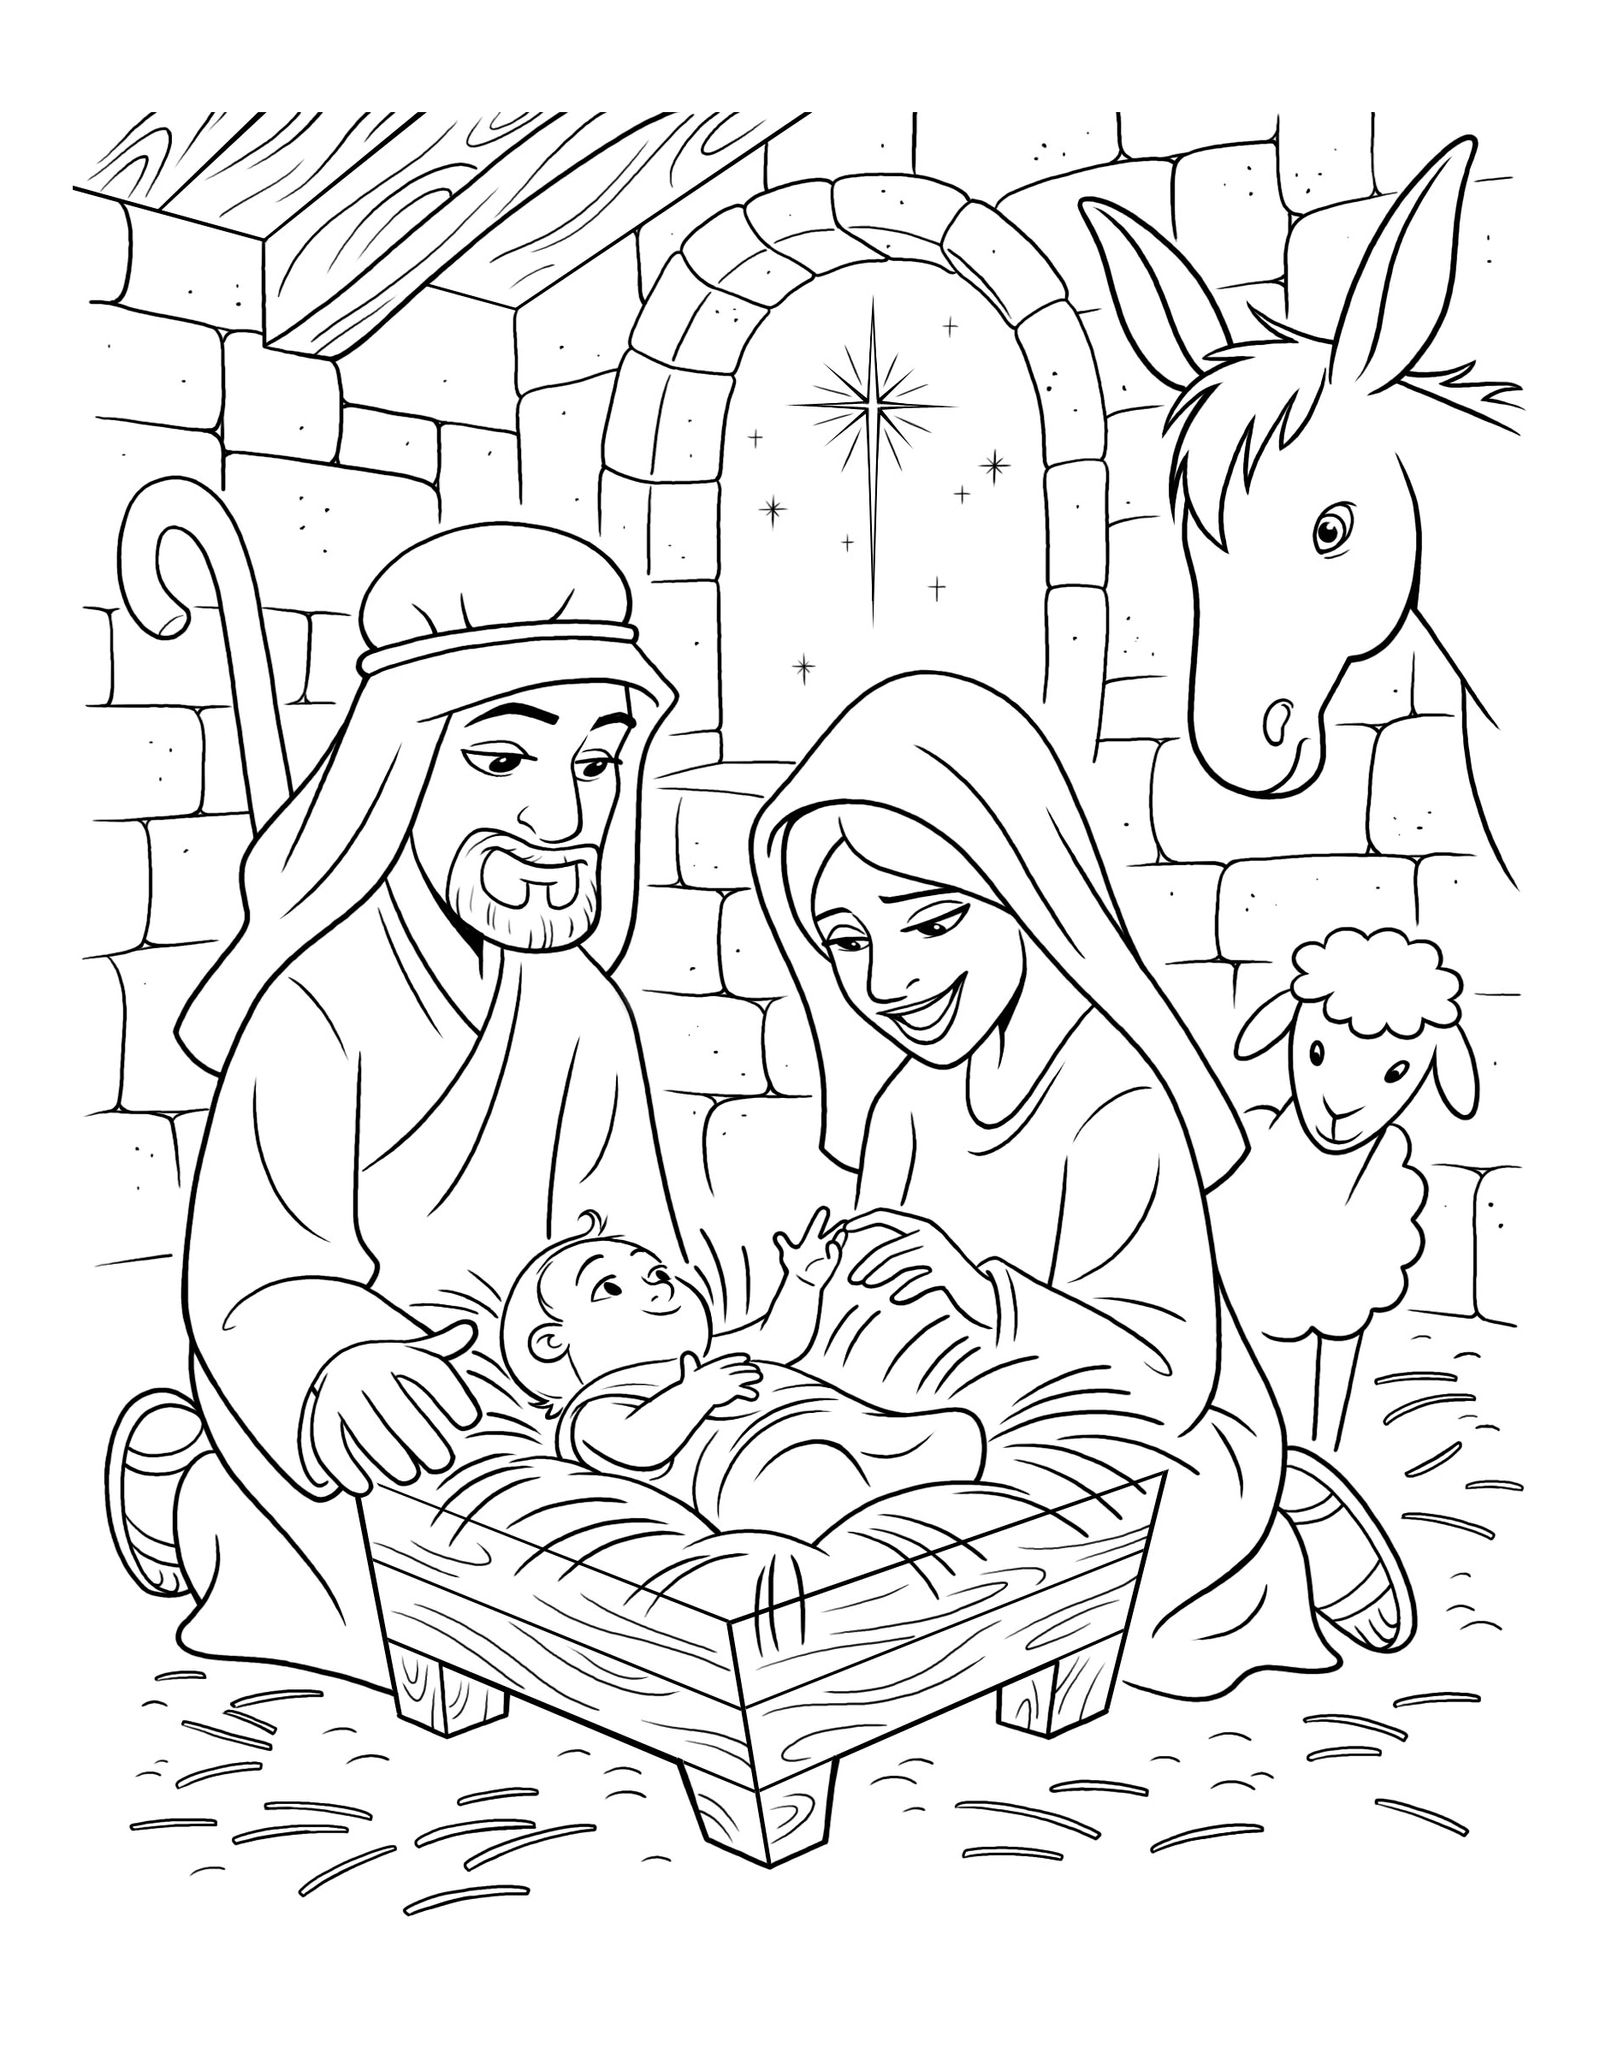 Mary and Joseph sit next to the manger where baby Jesus lies.